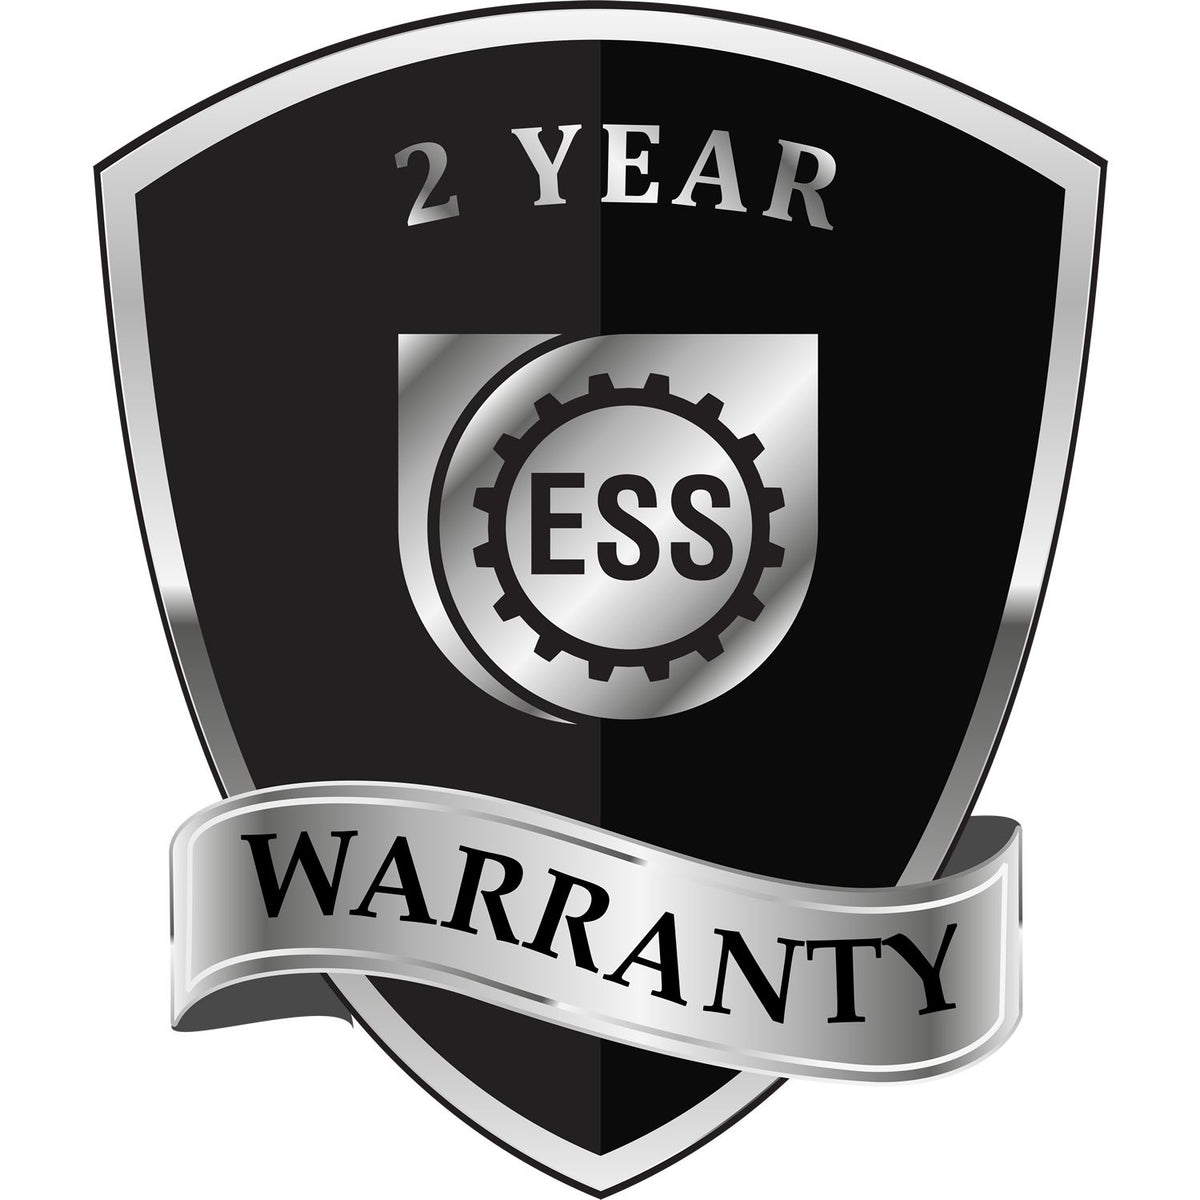 A black and silver badge or emblem showing warranty information for the Gift Tennessee Landscape Architect Seal